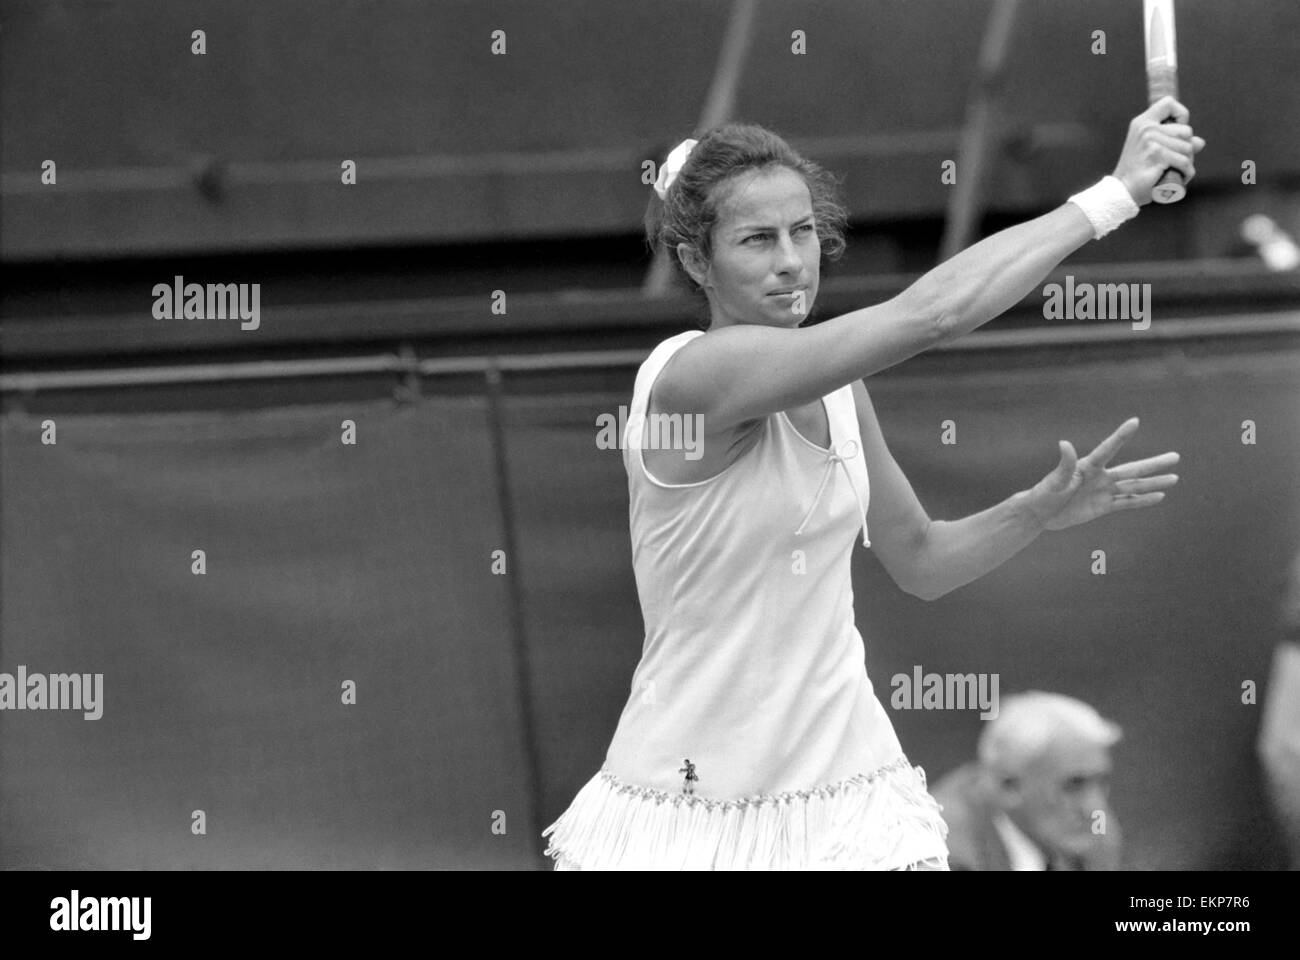 Wimbledon 1974: Miss Virginia Wade (G.B.) in action on the centre Court today against Miss L. Boshoff (South Africa). Miss Wade won the match. July 1974 74-3985-129 Stock Photo